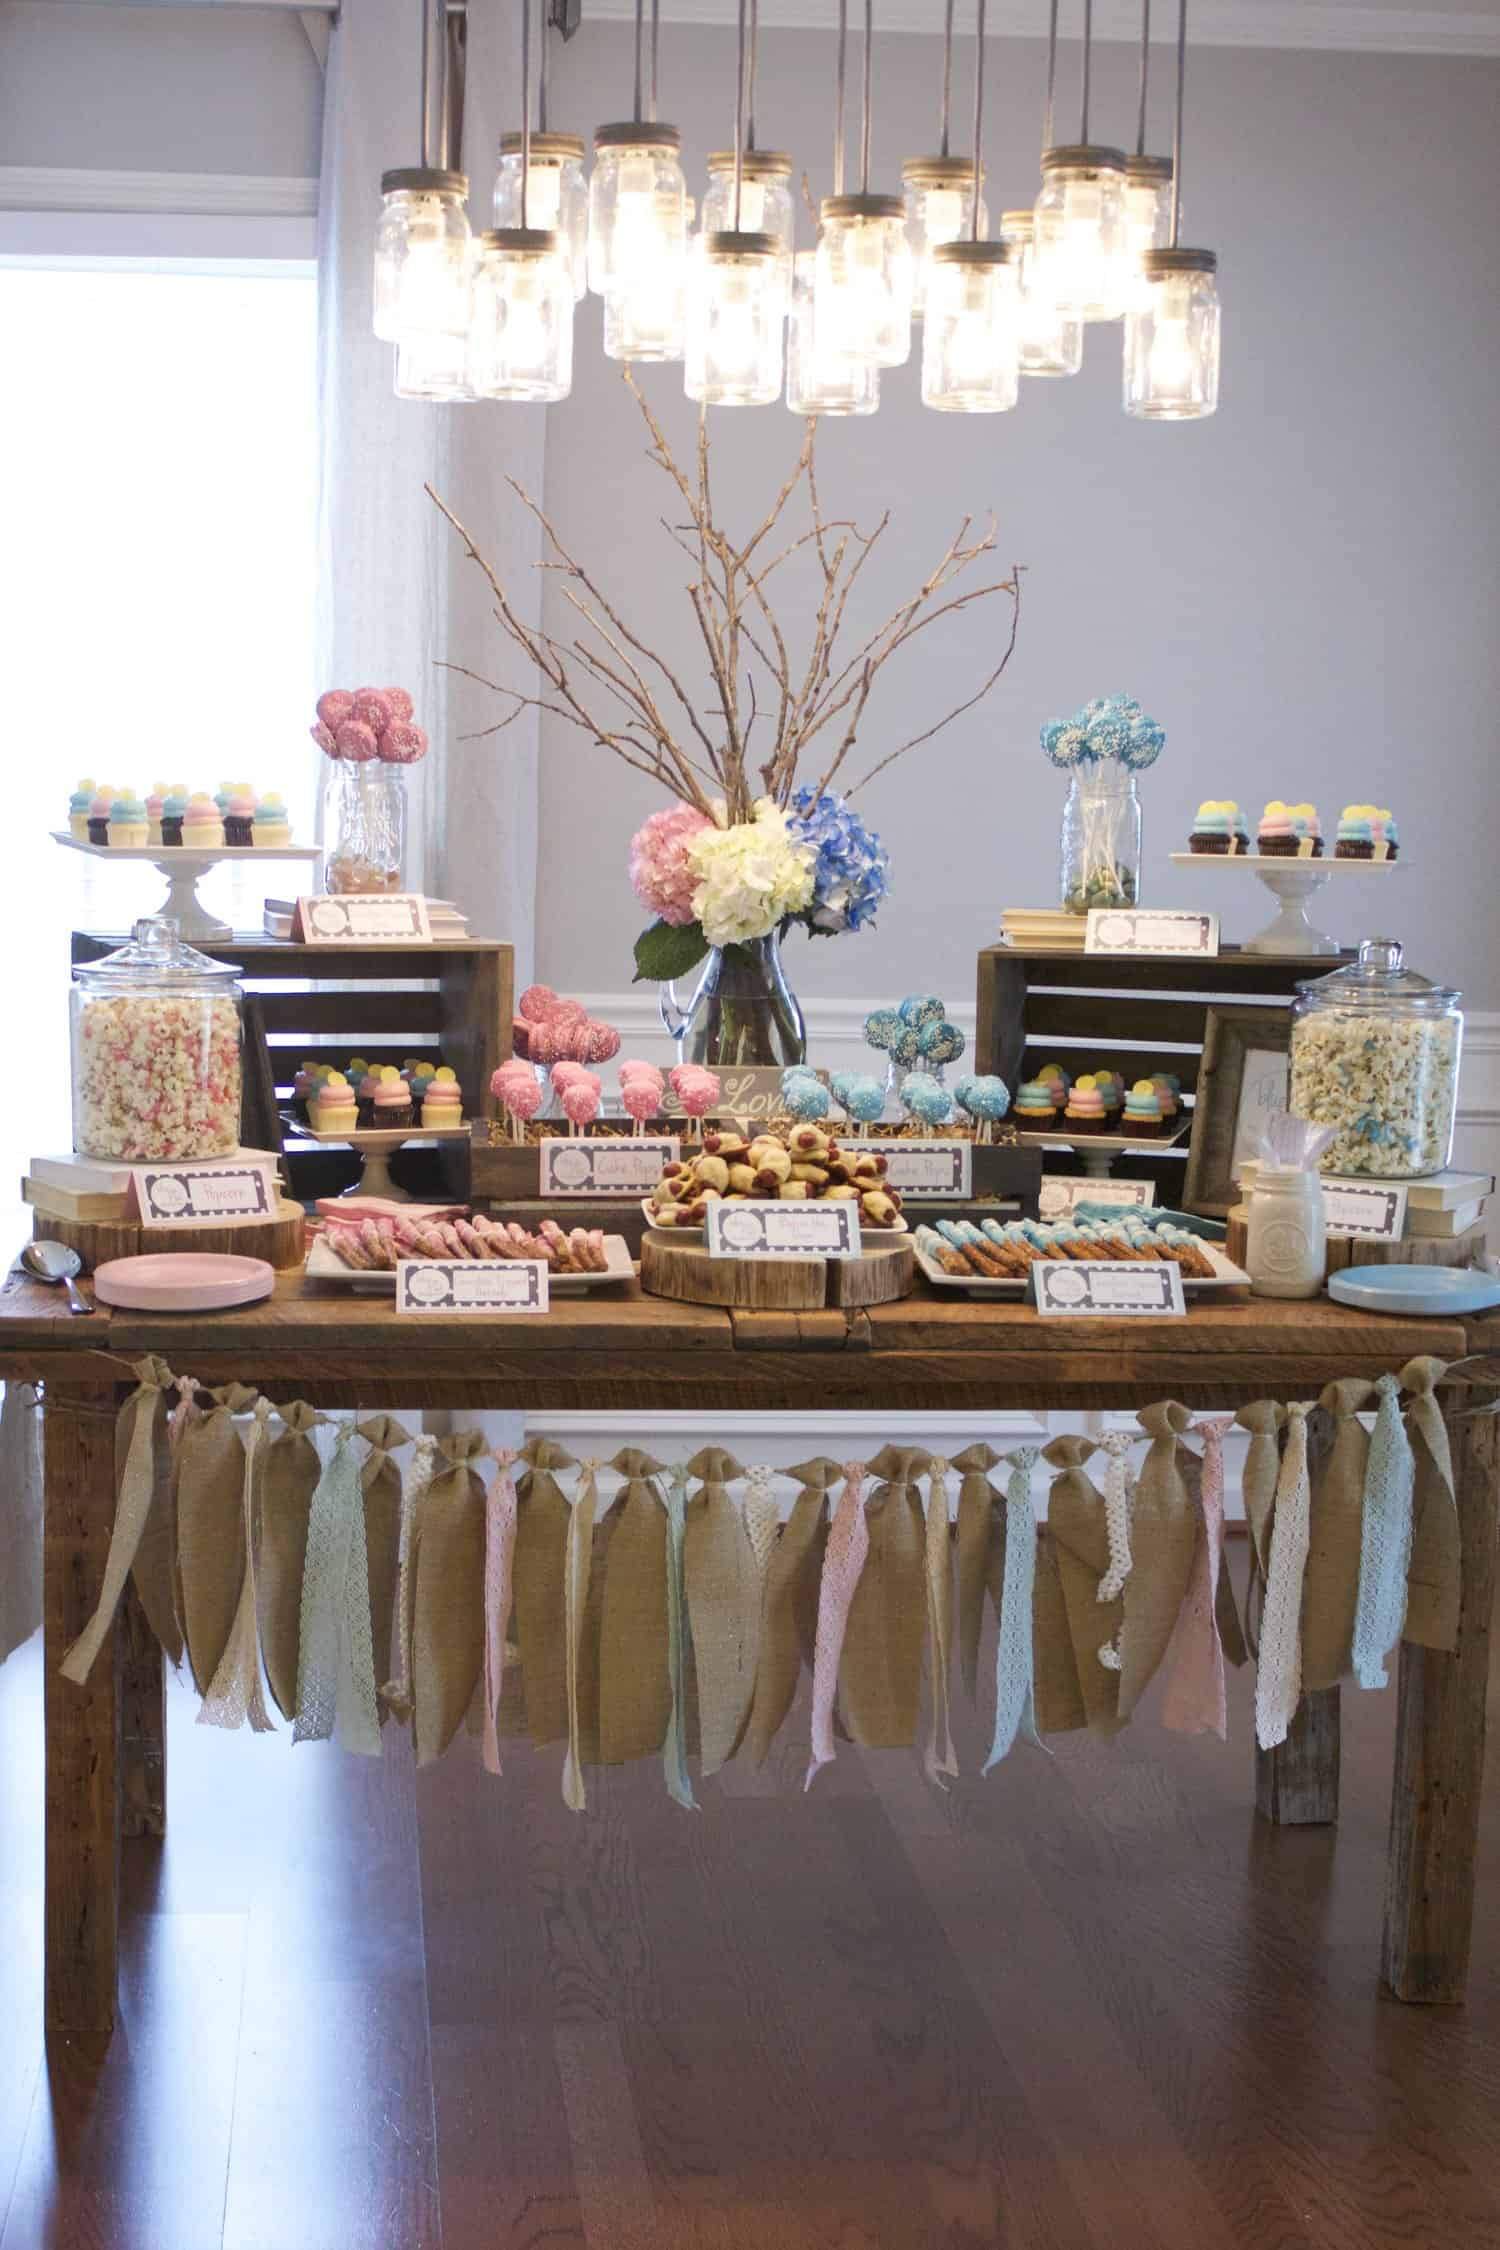 Classy Gender Reveal Party Ideas
 17 Tips To Throw An Unfor table Gender Reveal Party